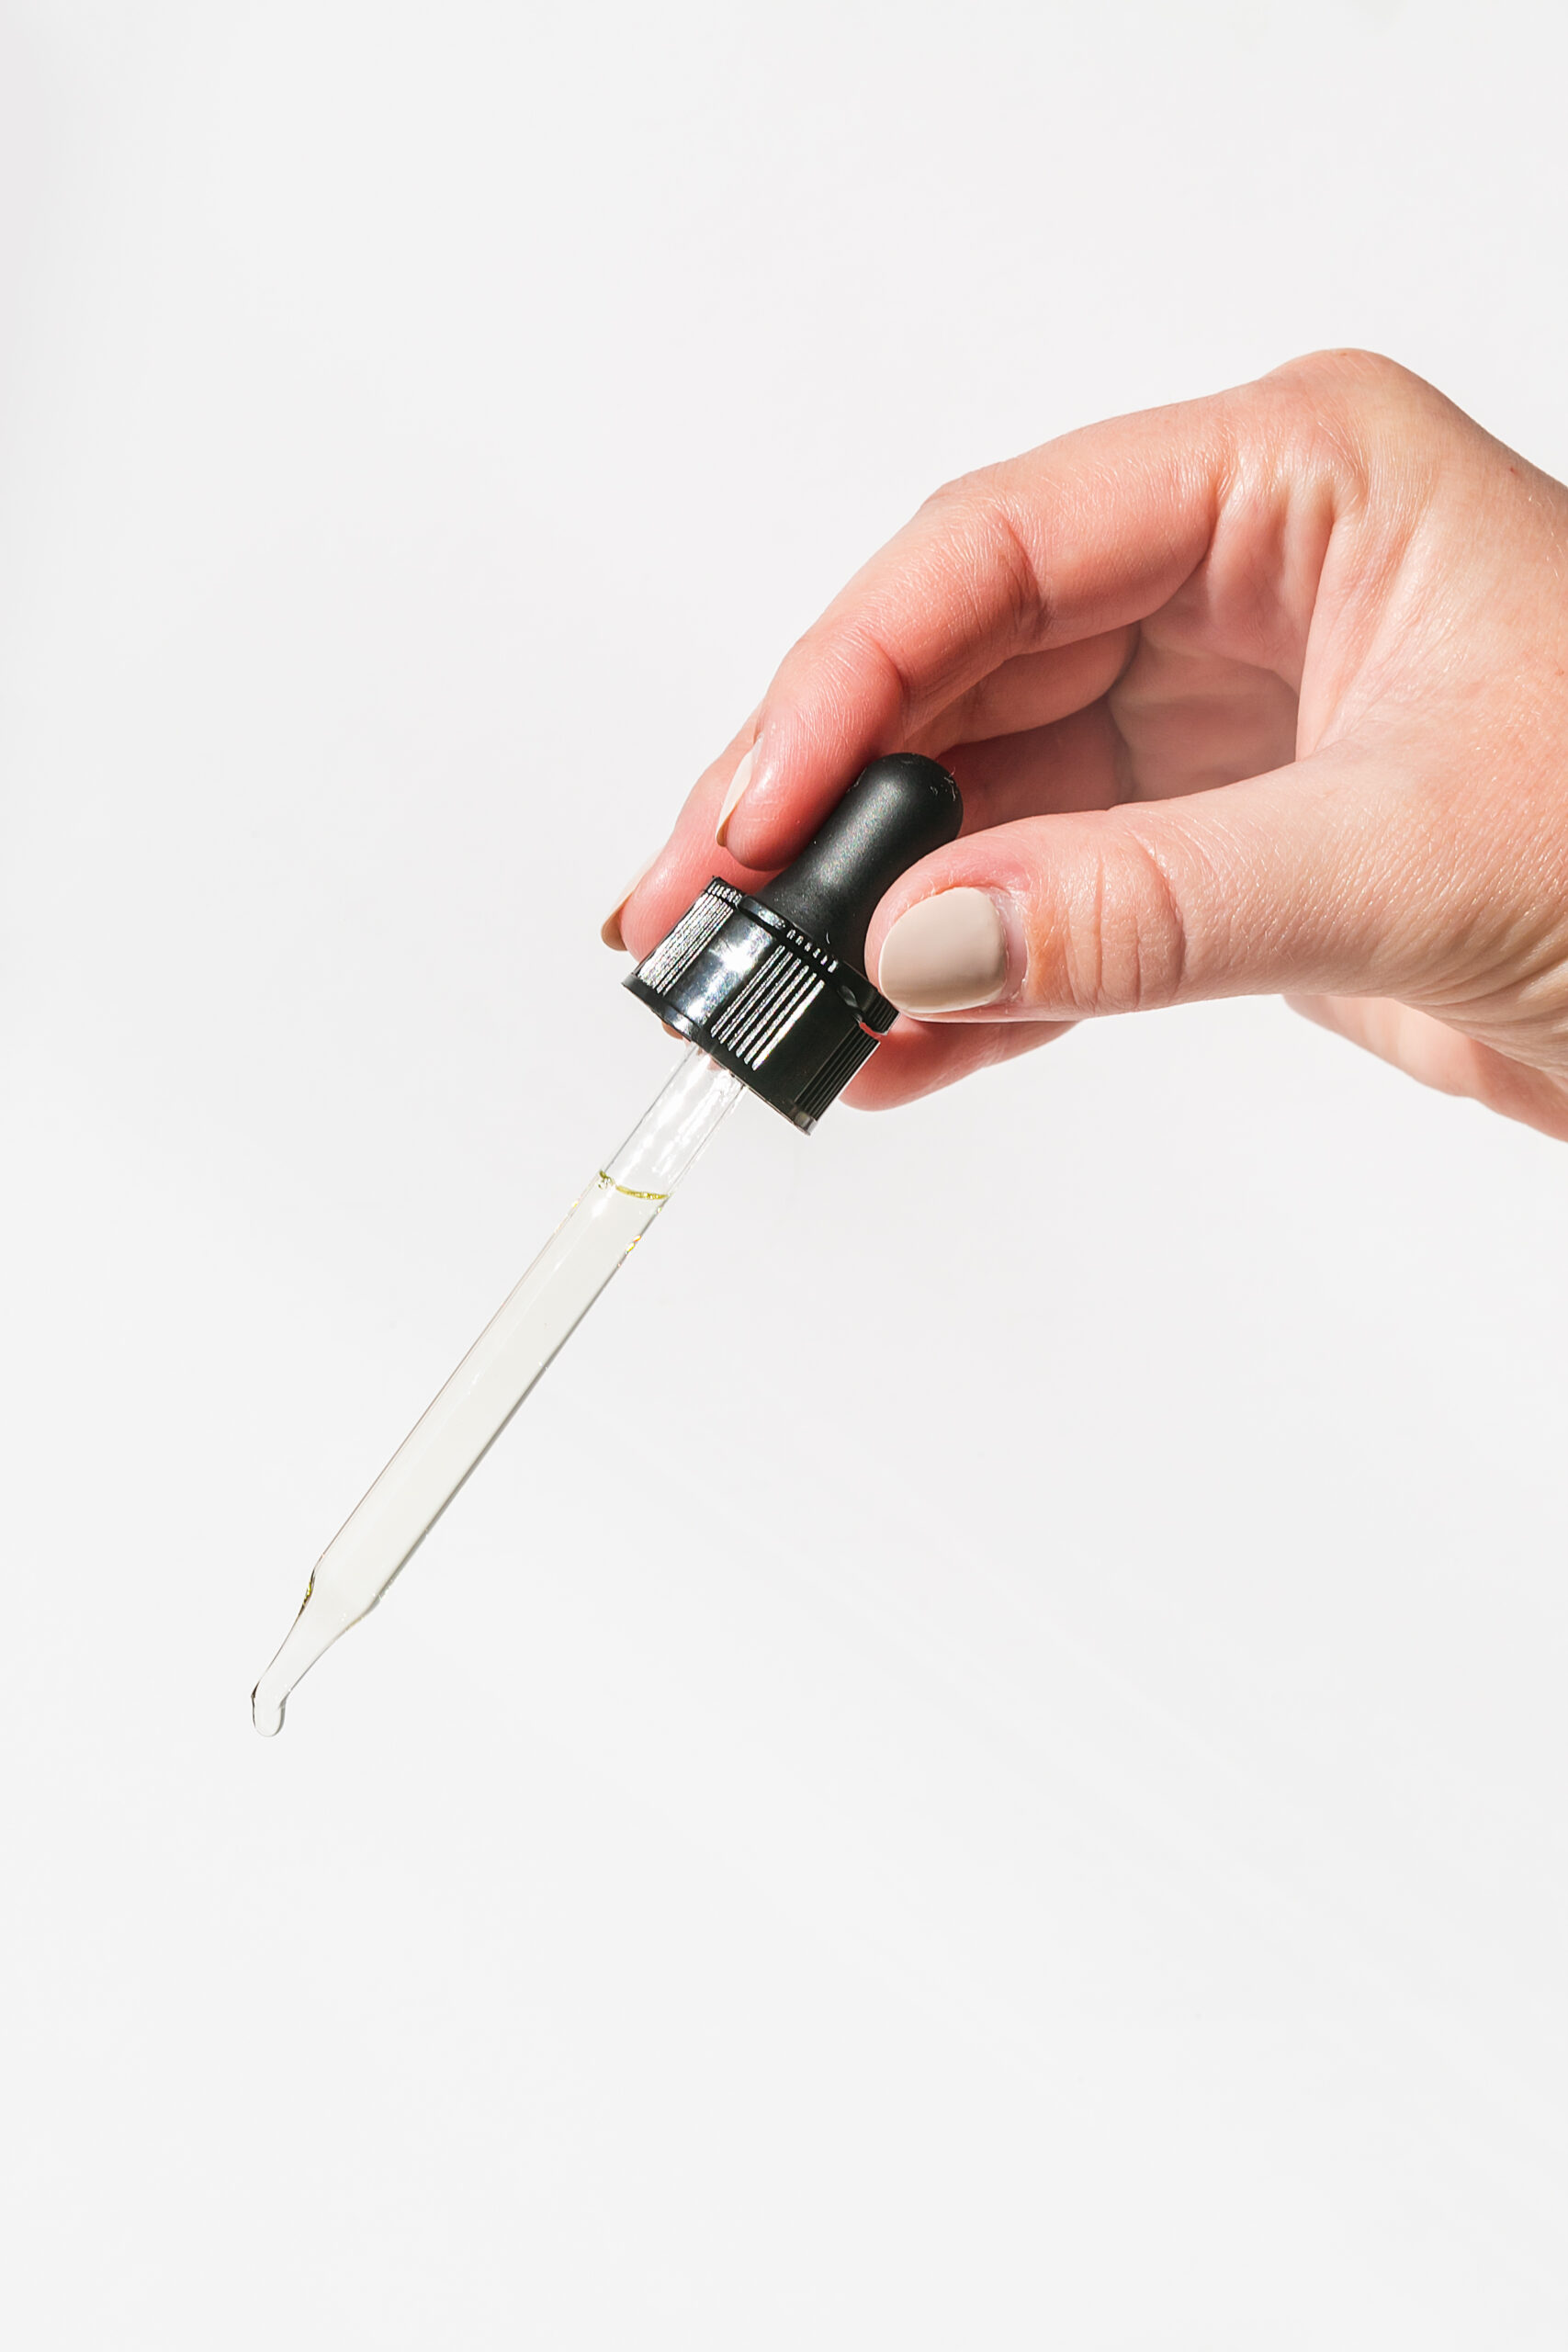 CAN CBD OIL ISOLATE GET YOU HIGH?